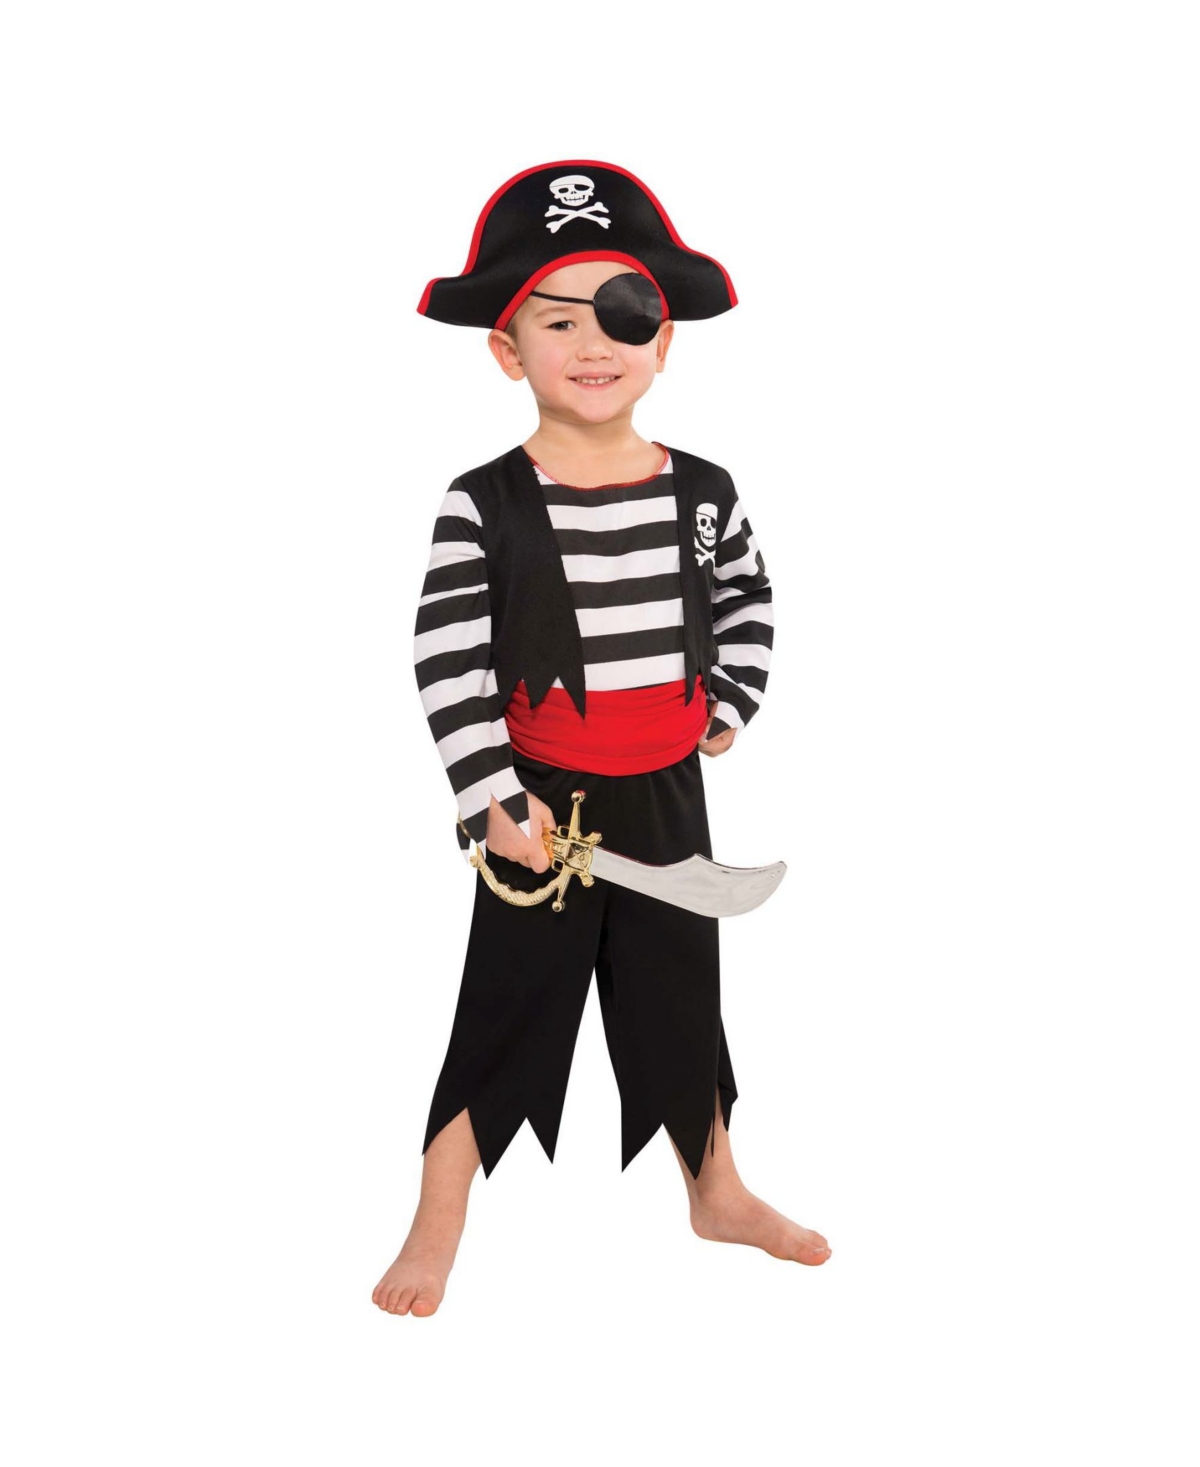 size Toddler (3-4) Suit Yourself Rascal Pirate Costume for Toddler Boys 